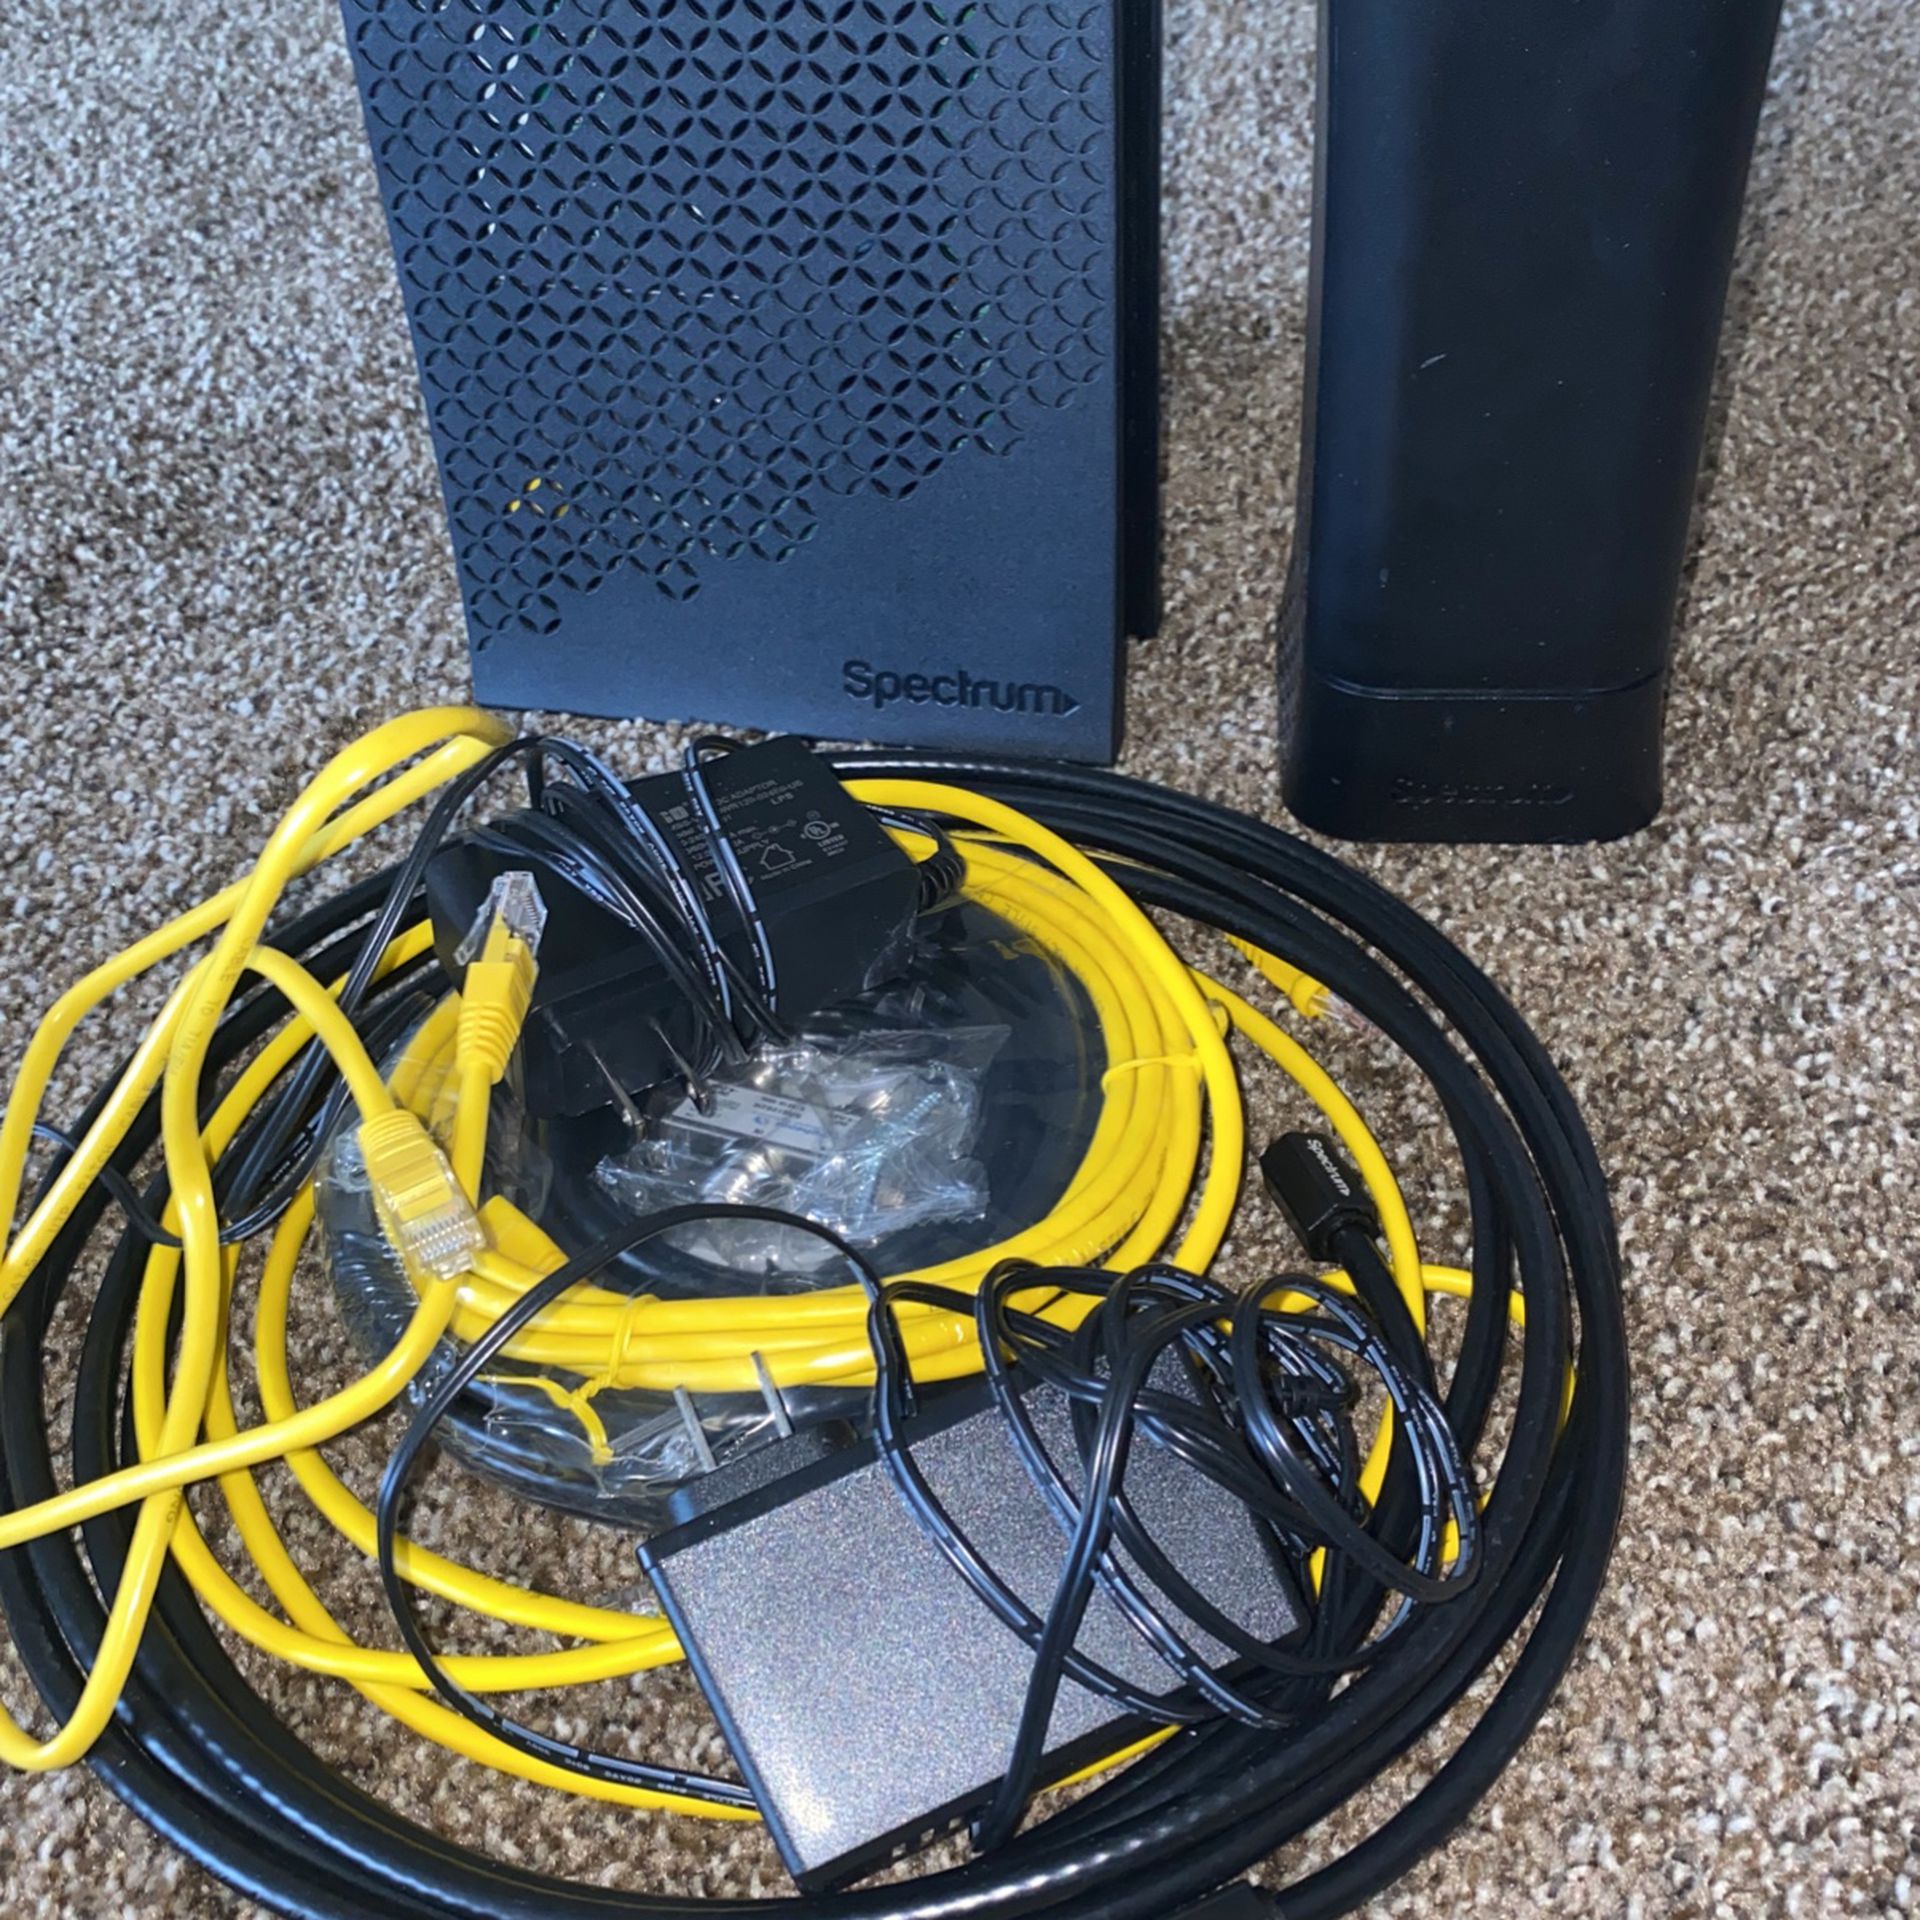 Modem And Router 